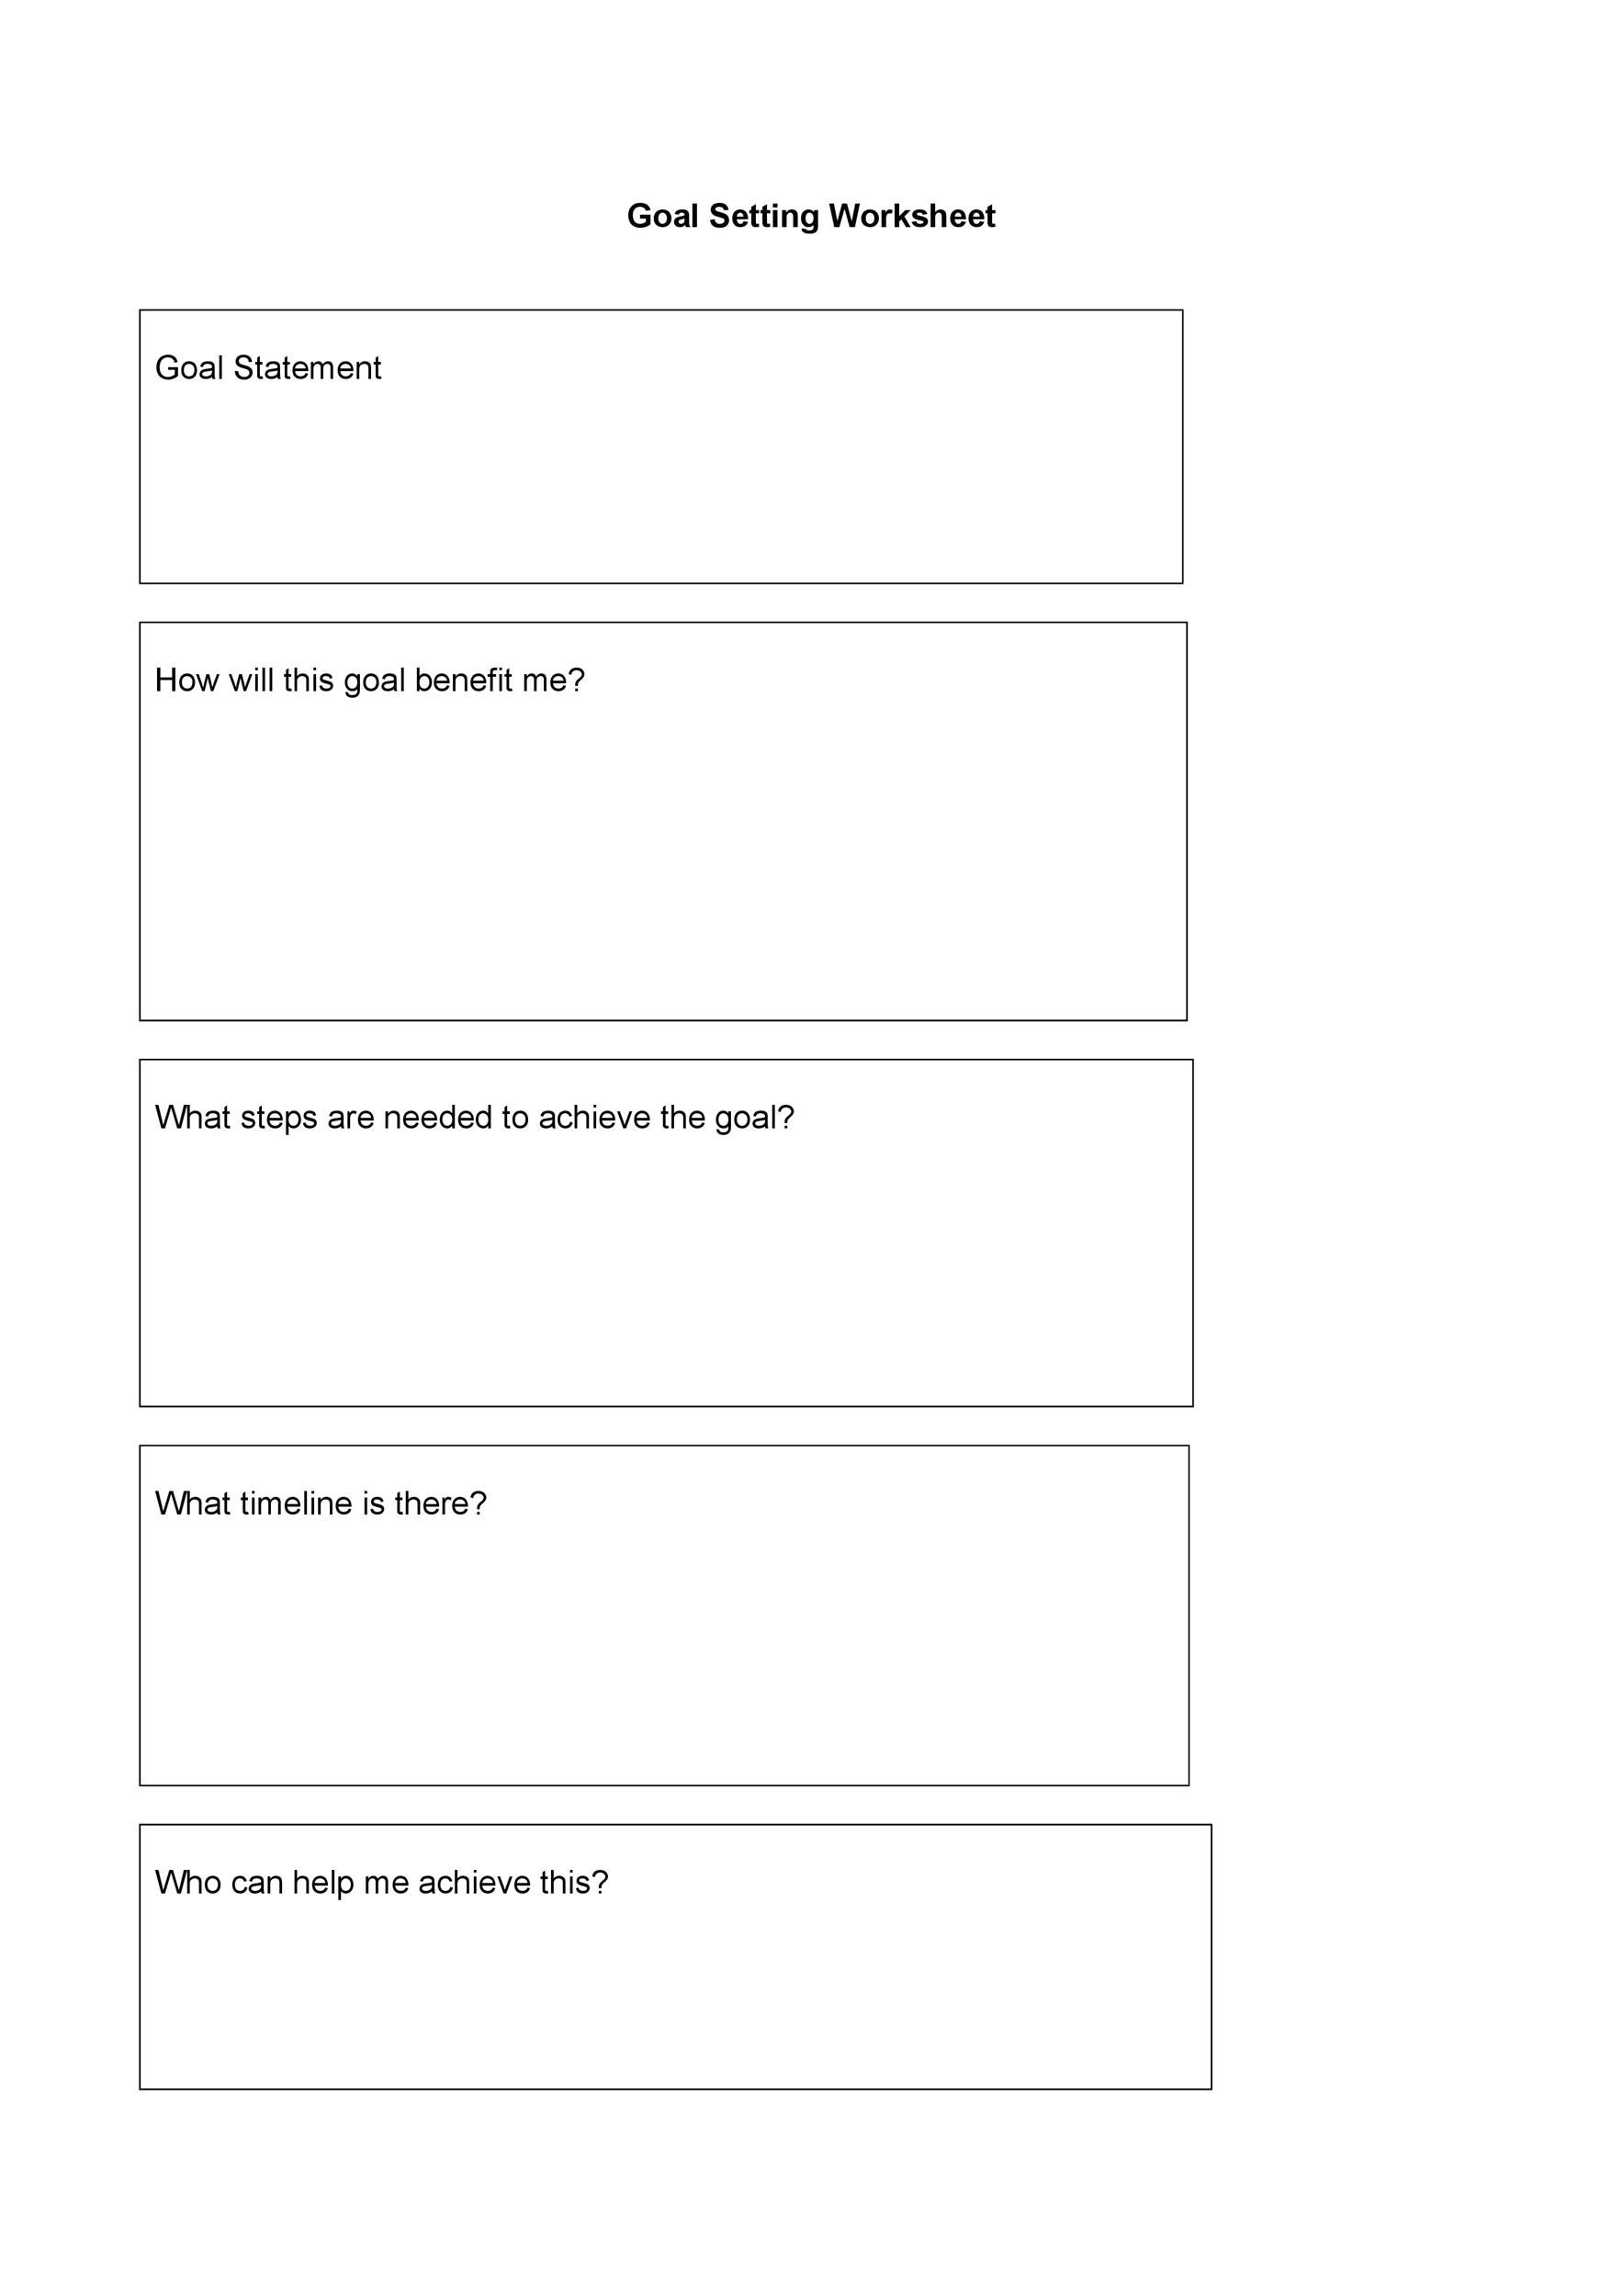 41 S M A R T Goal Setting Templates Worksheets ᐅ TemplateLab